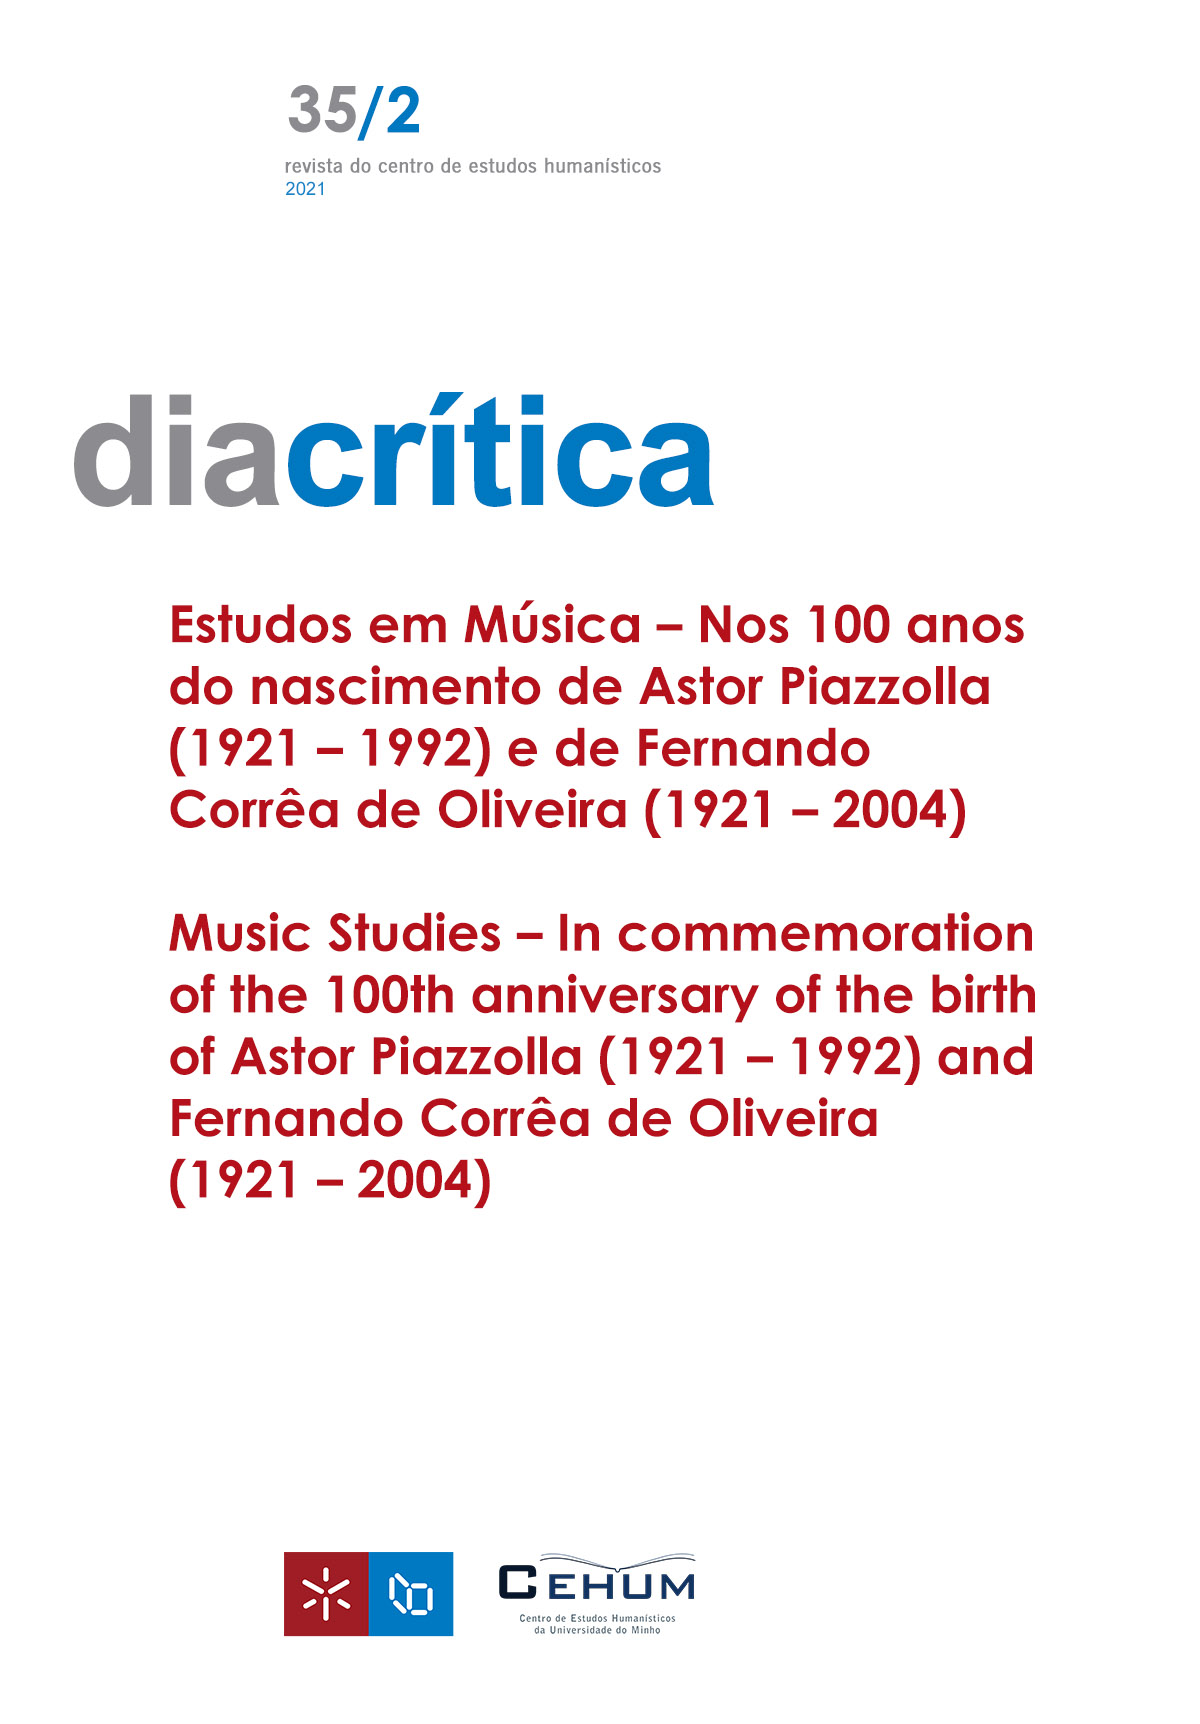 					View Vol. 35 No. 2 (2021): Music Studies – In commemoration of the 100th anniversary of the birth of Astor Piazzolla (1921 – 1992) and Fernando Corrêa de Oliveira (1921 – 2004)
				